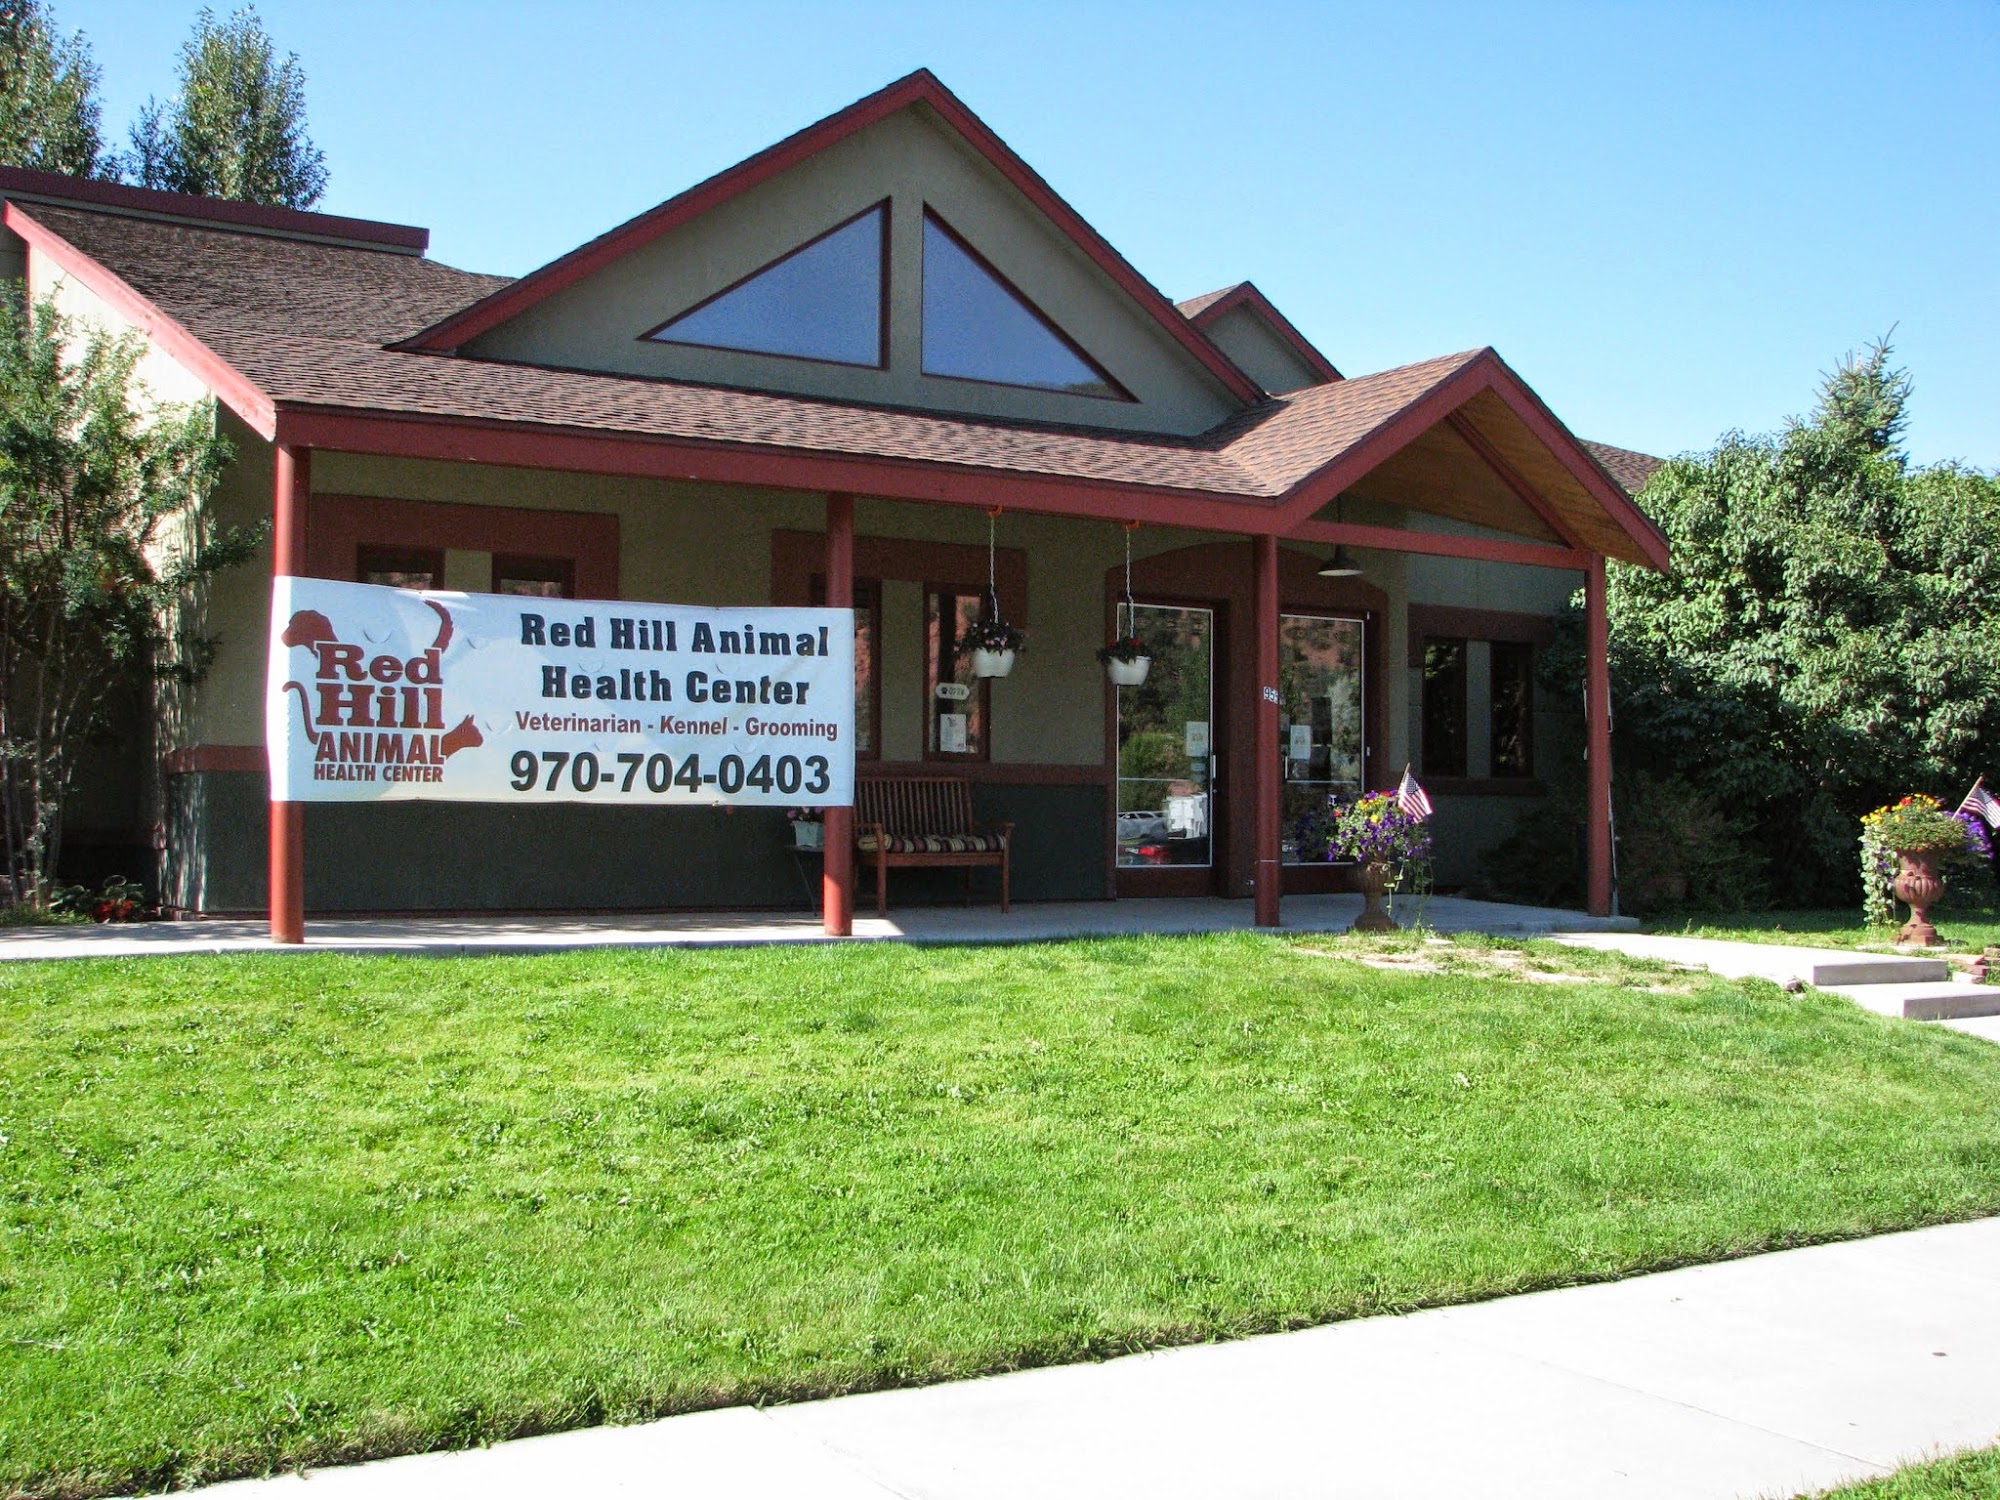 Red Hill Animal Health Center